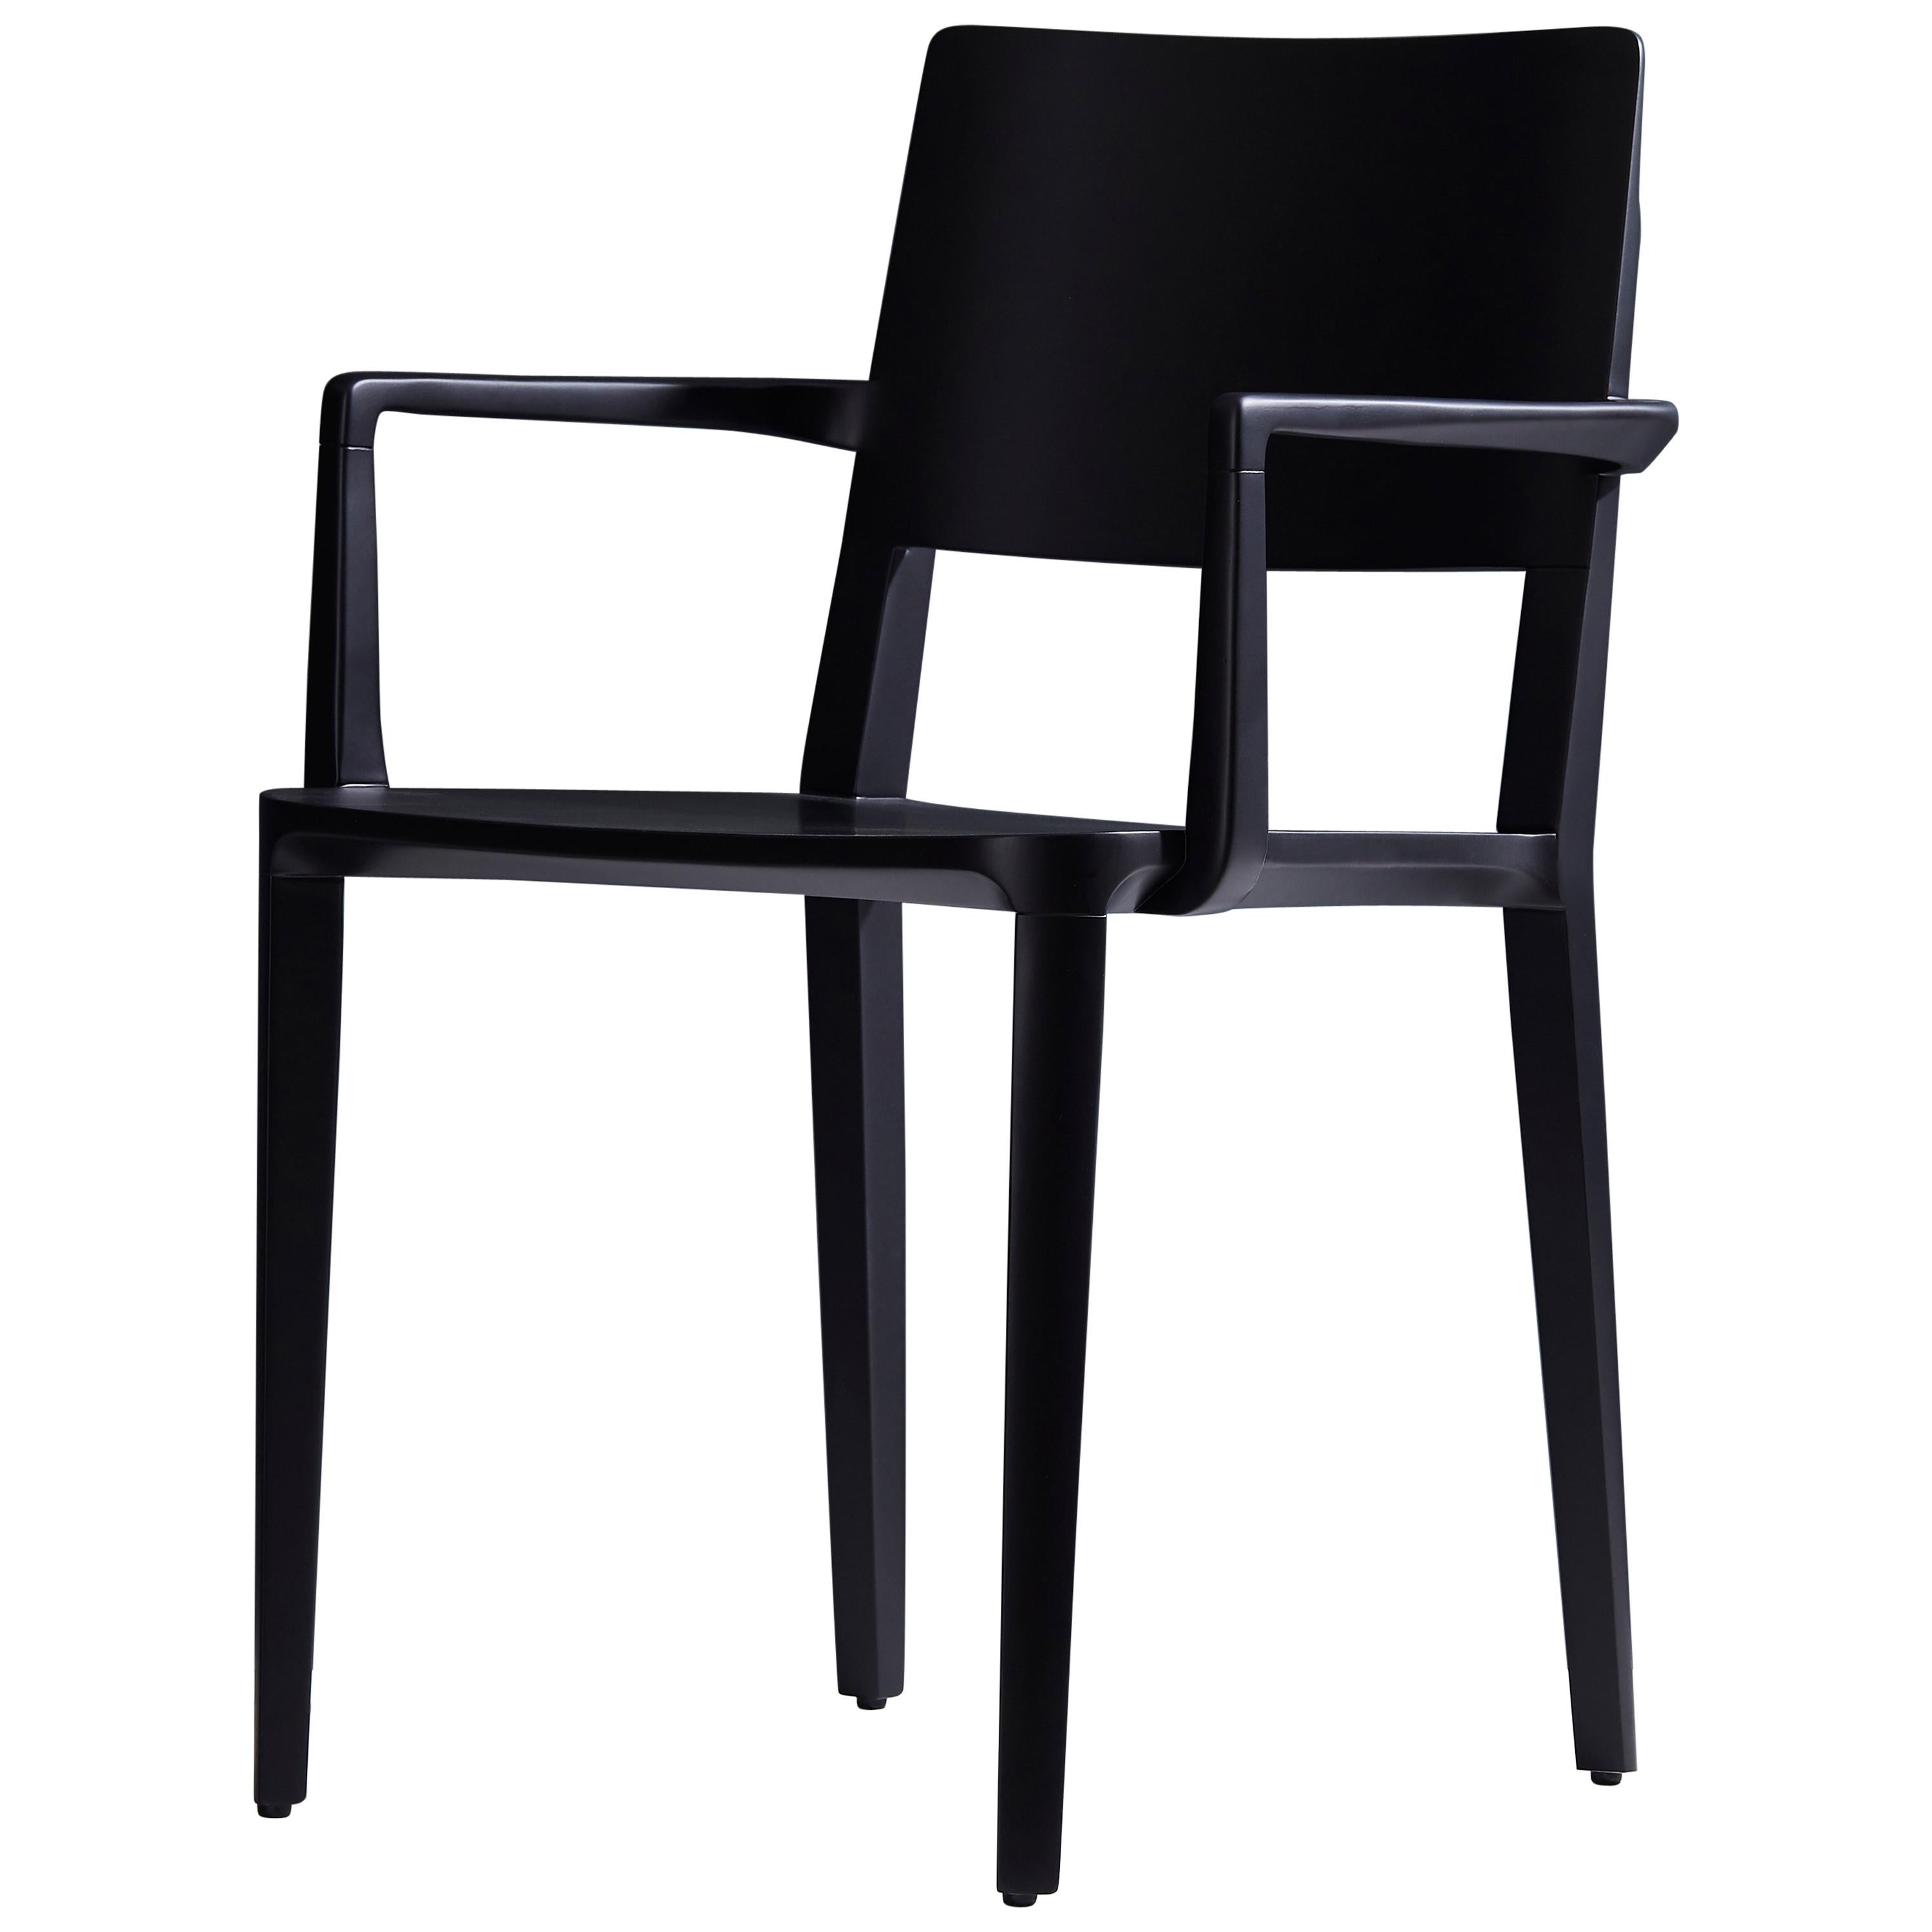 Minimalist Modern Chair in Solid Wood Black Finish with Arms